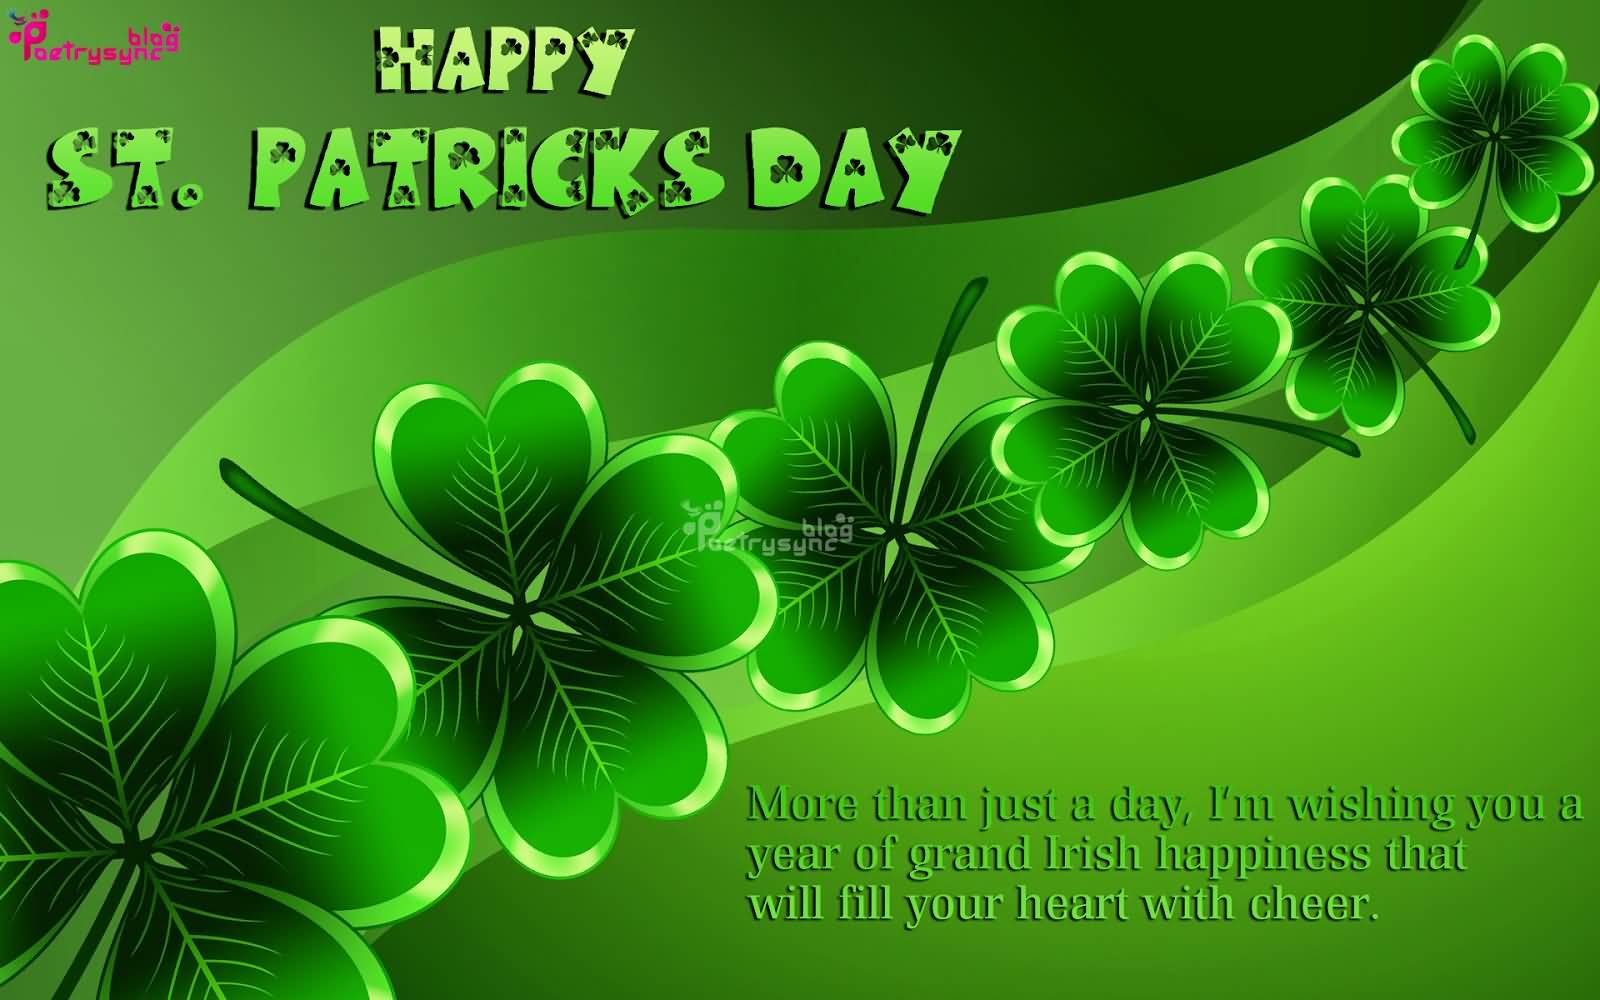 Happy Saint Patrick’s Day More Than Just A Day, I’m Wishing You A Year Of Grand Irish Happiness That Will Fill Your Heart With Cheer